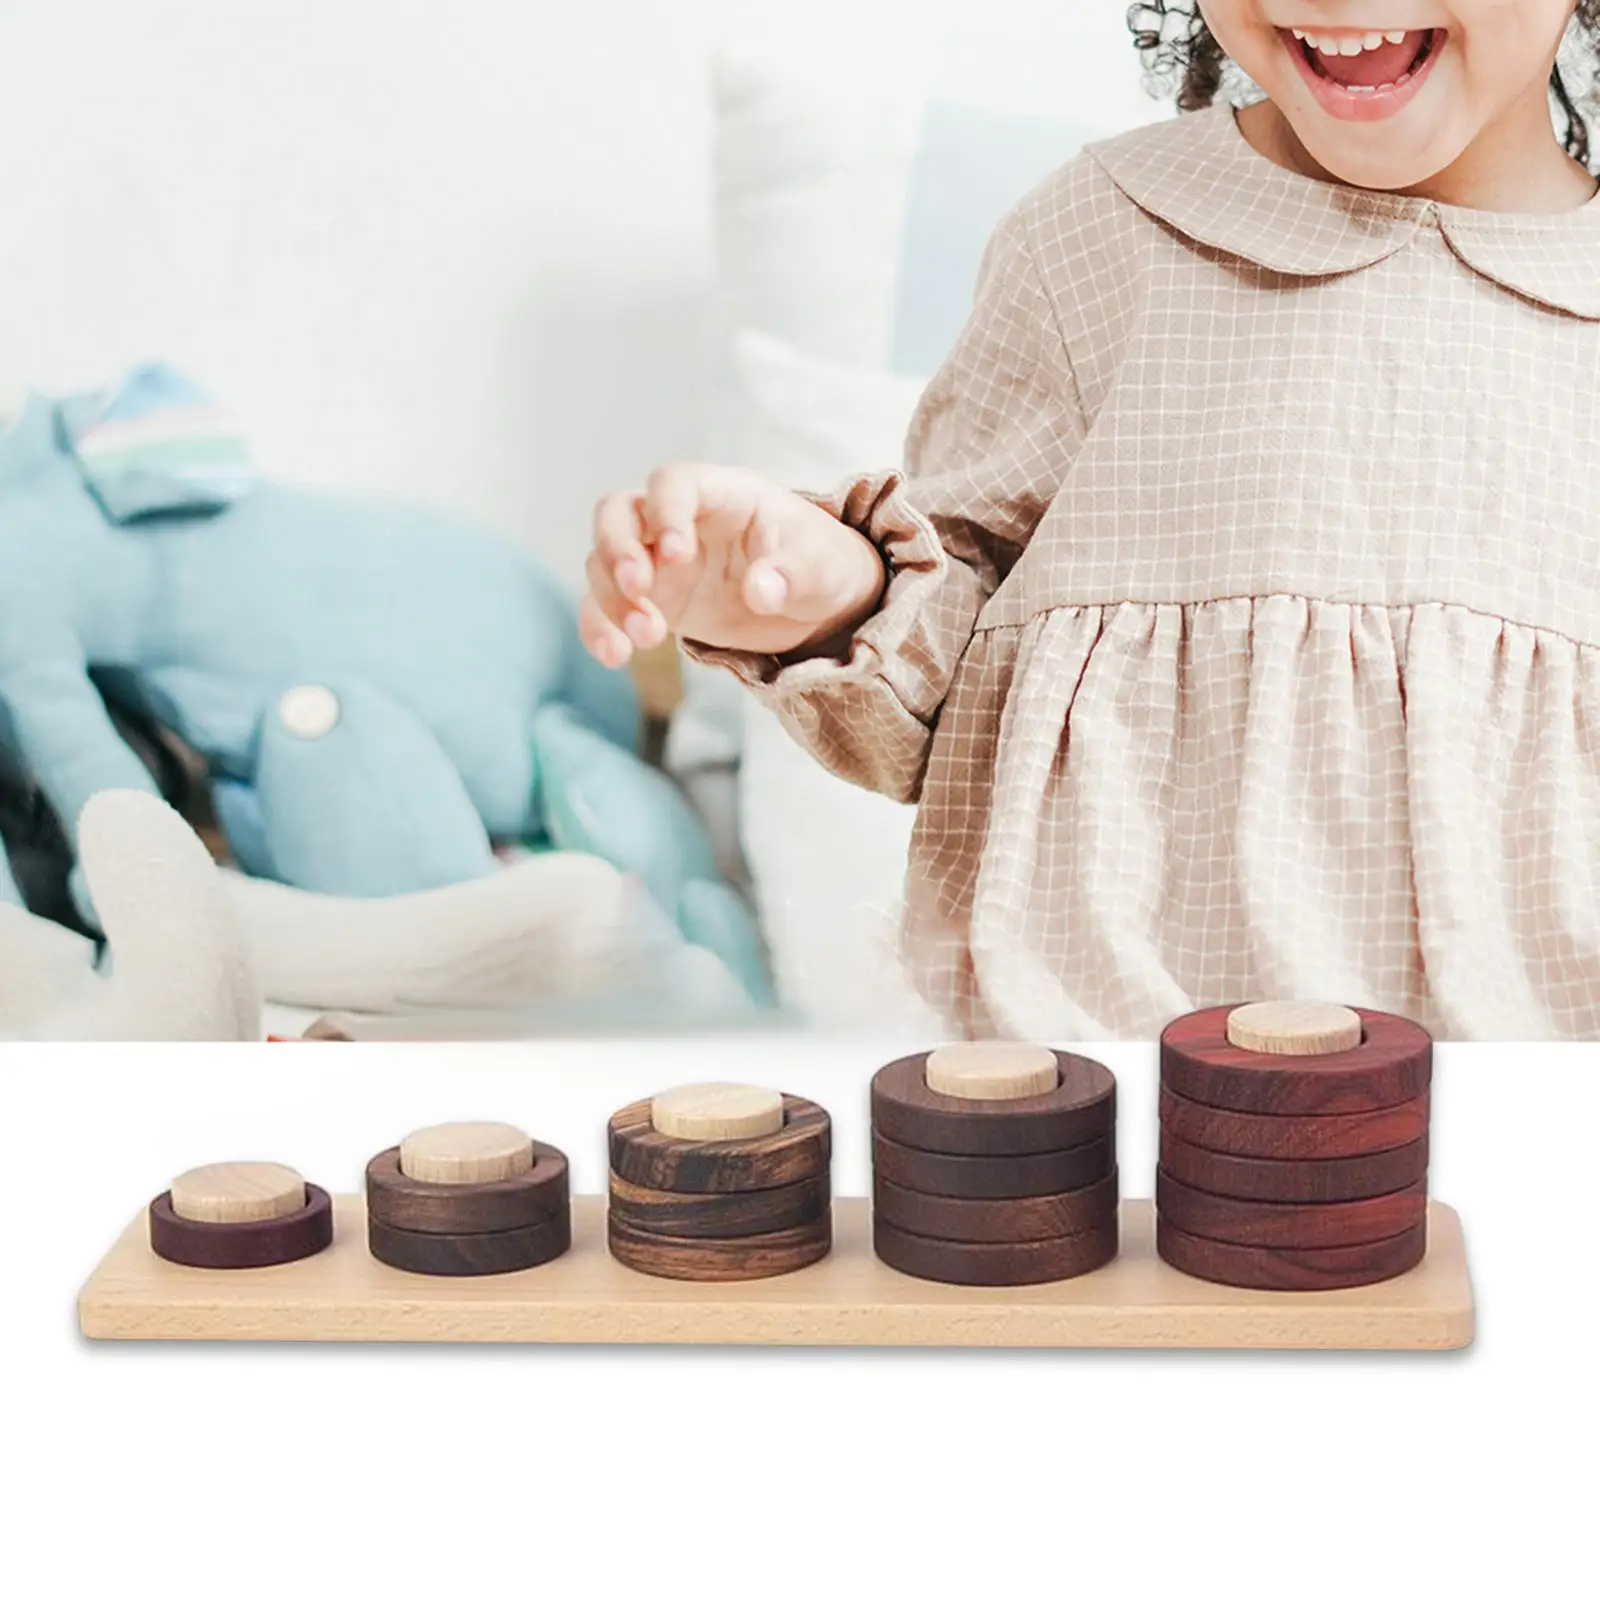 Wooden Stacking Toys Sensory Toys Fine Motor Skills Round Blocks Educational Learning Toy for Toddlers Girls Boy Birthday Gifts